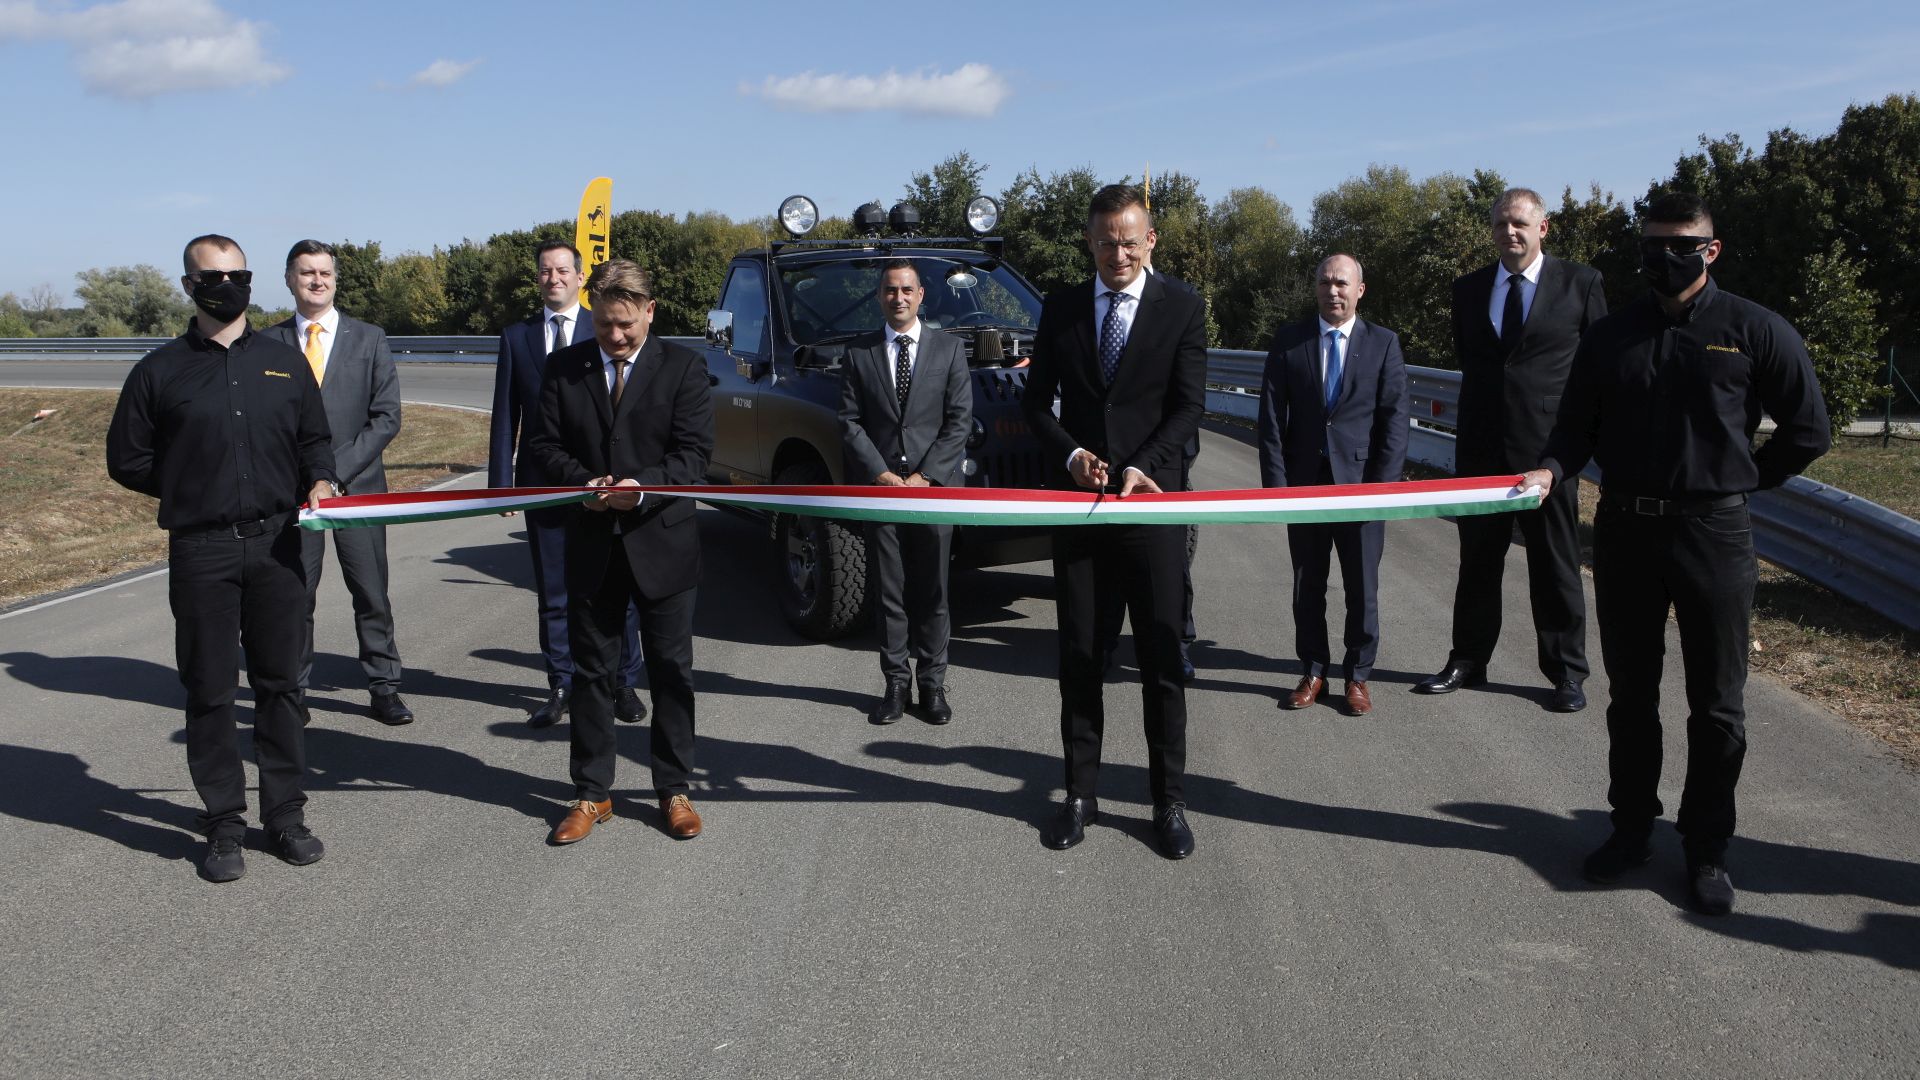 Continental handed over its redesigned test track in Veszprém